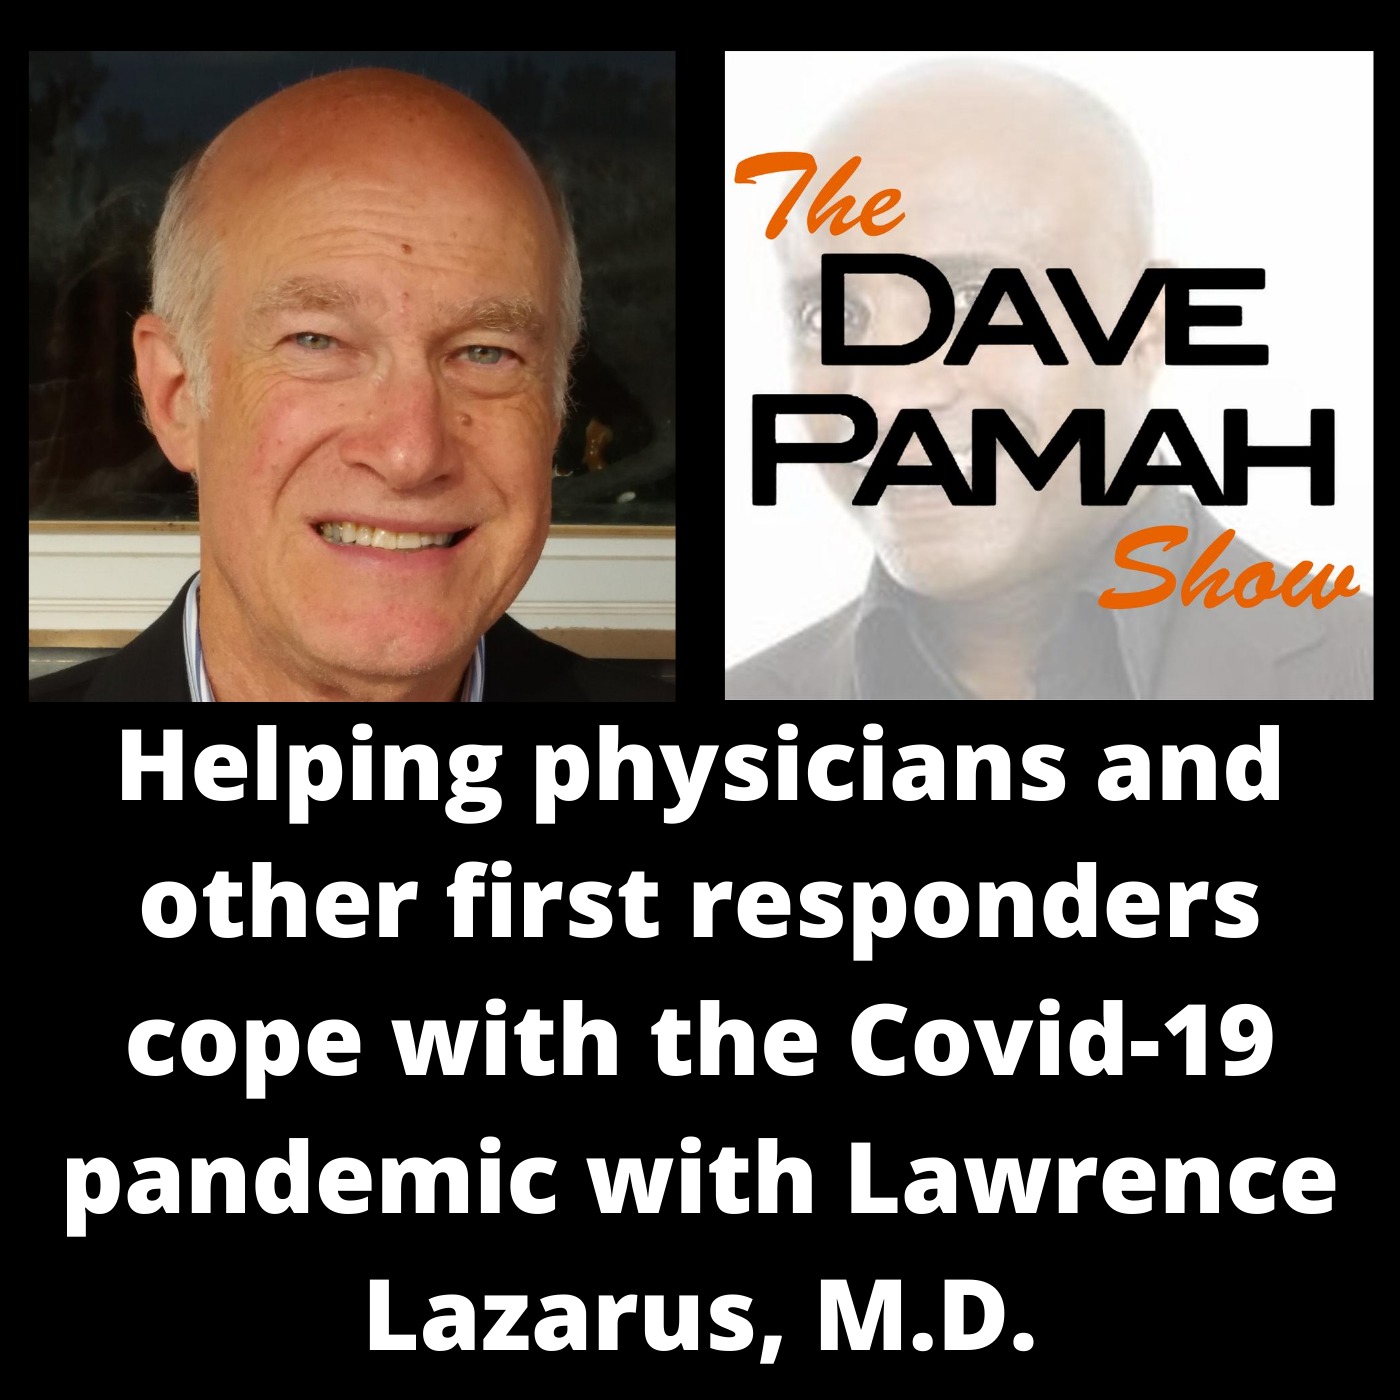 Helping physicians and other first responders cope with the Covid-19 pandemic with Lawrence Lazarus, M.D.